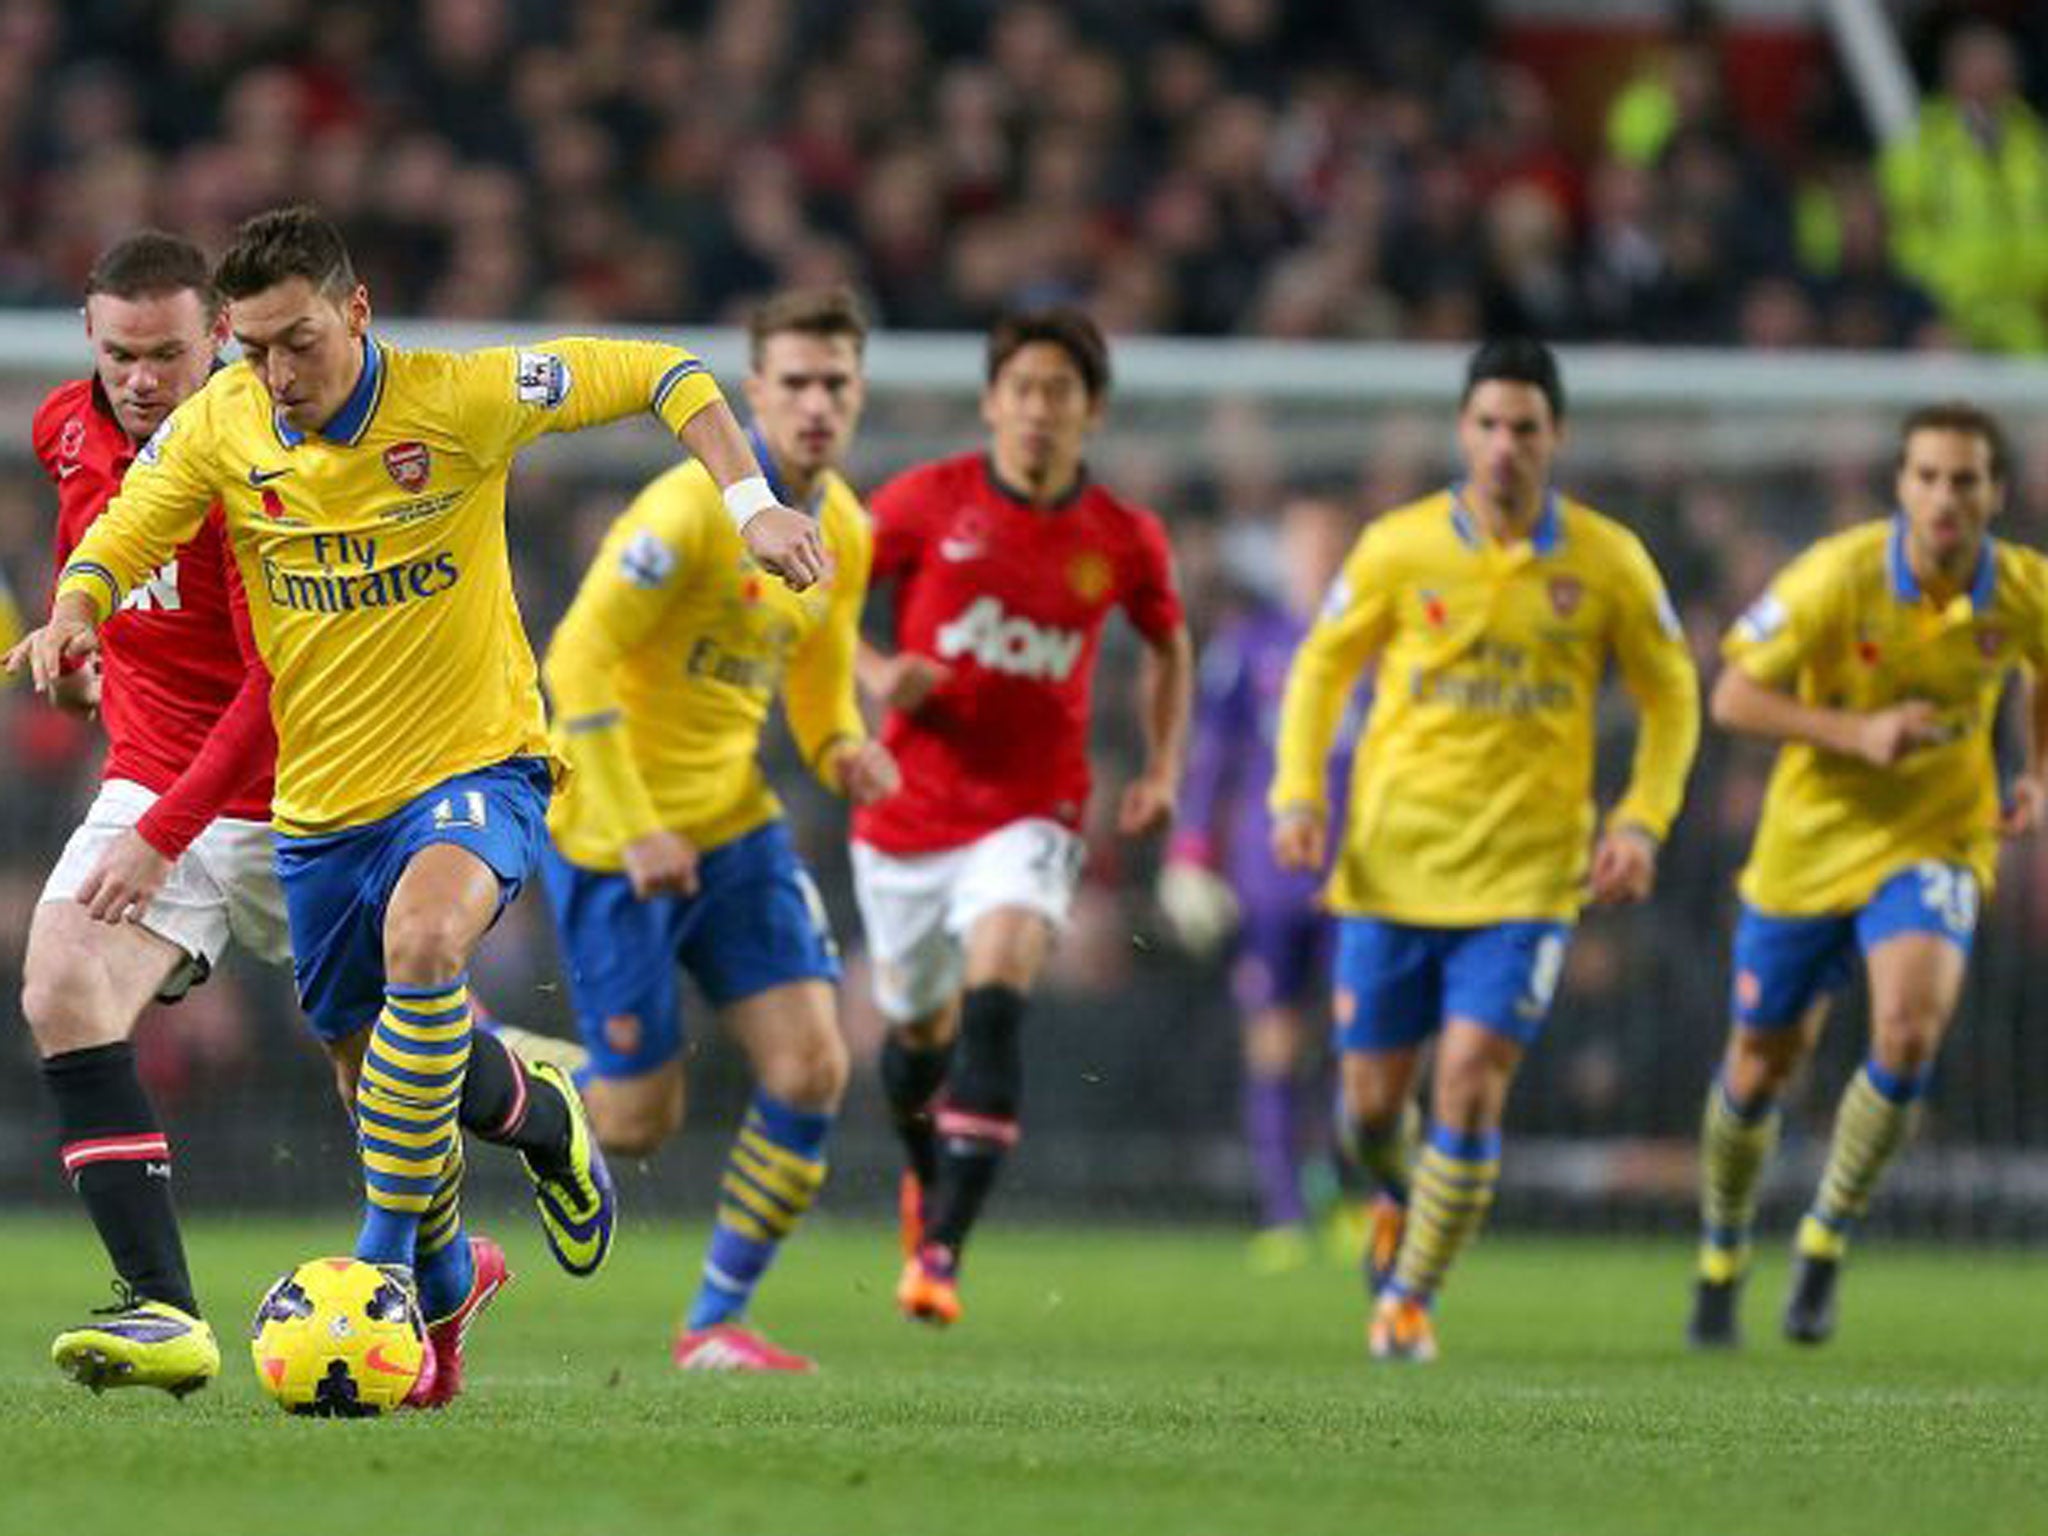 Arsenal’s Mesut Ozil lacked his usual sureness of touch on the ball in the defeat at Old Trafford on Sunday